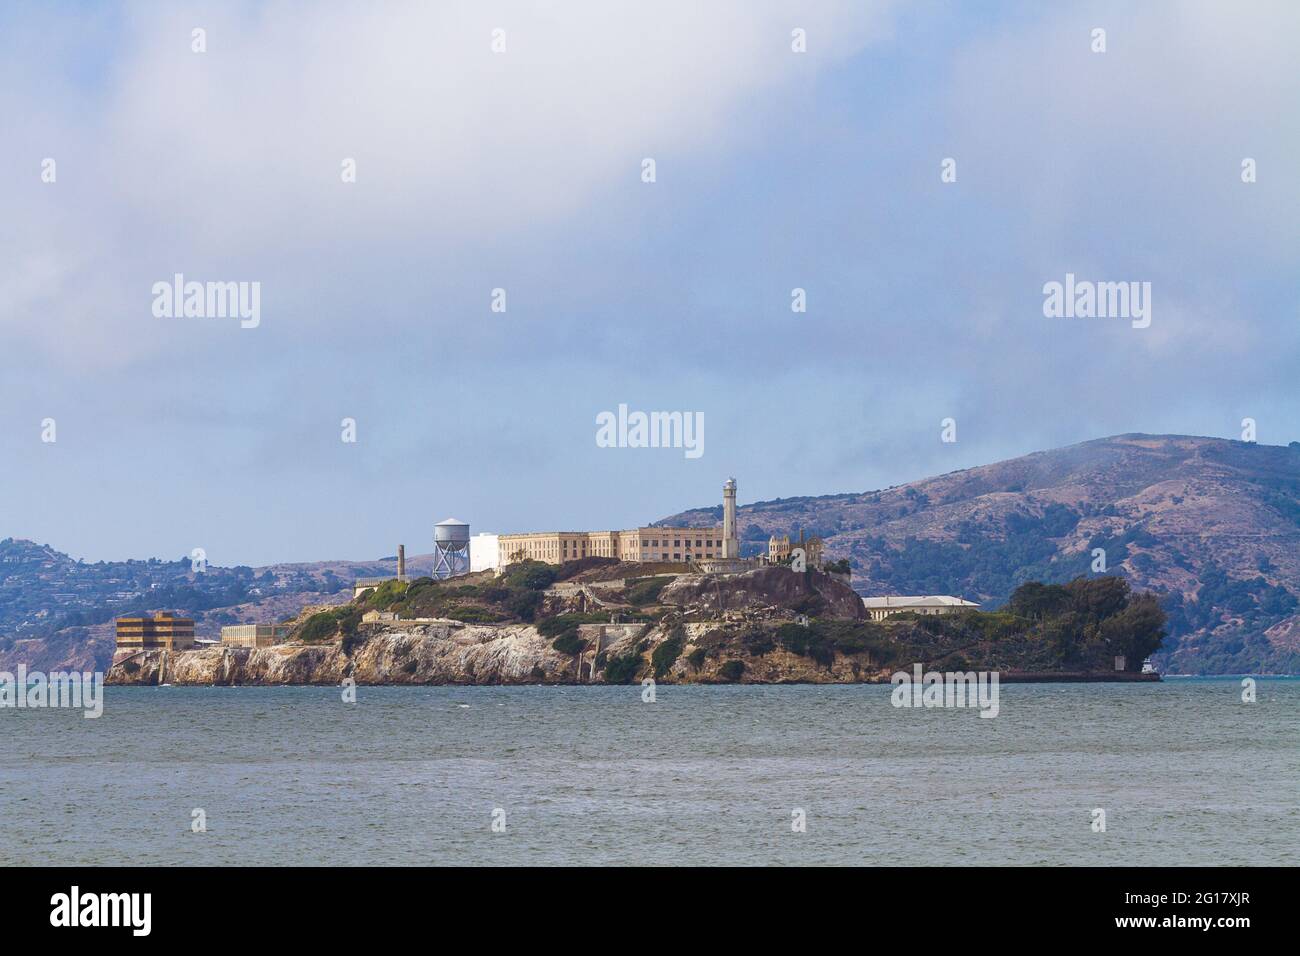 Close up image of the Alcatraz Cell house and lighthouse seen from Pier 39 Stock Photo